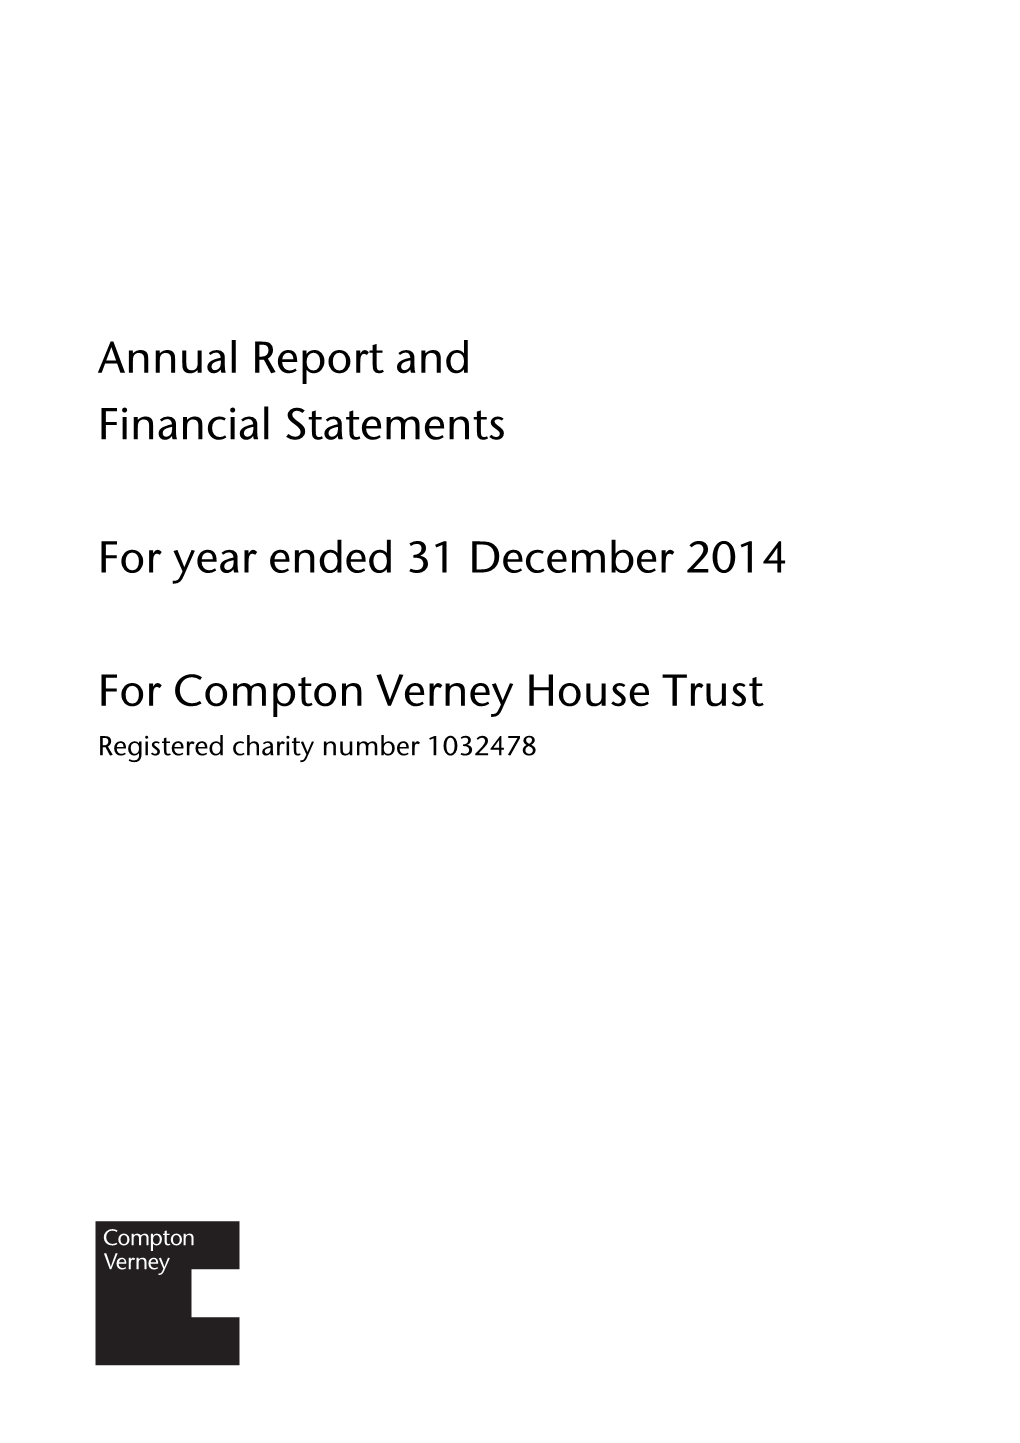 Annual Report and Financial Statements for Year Ended 31